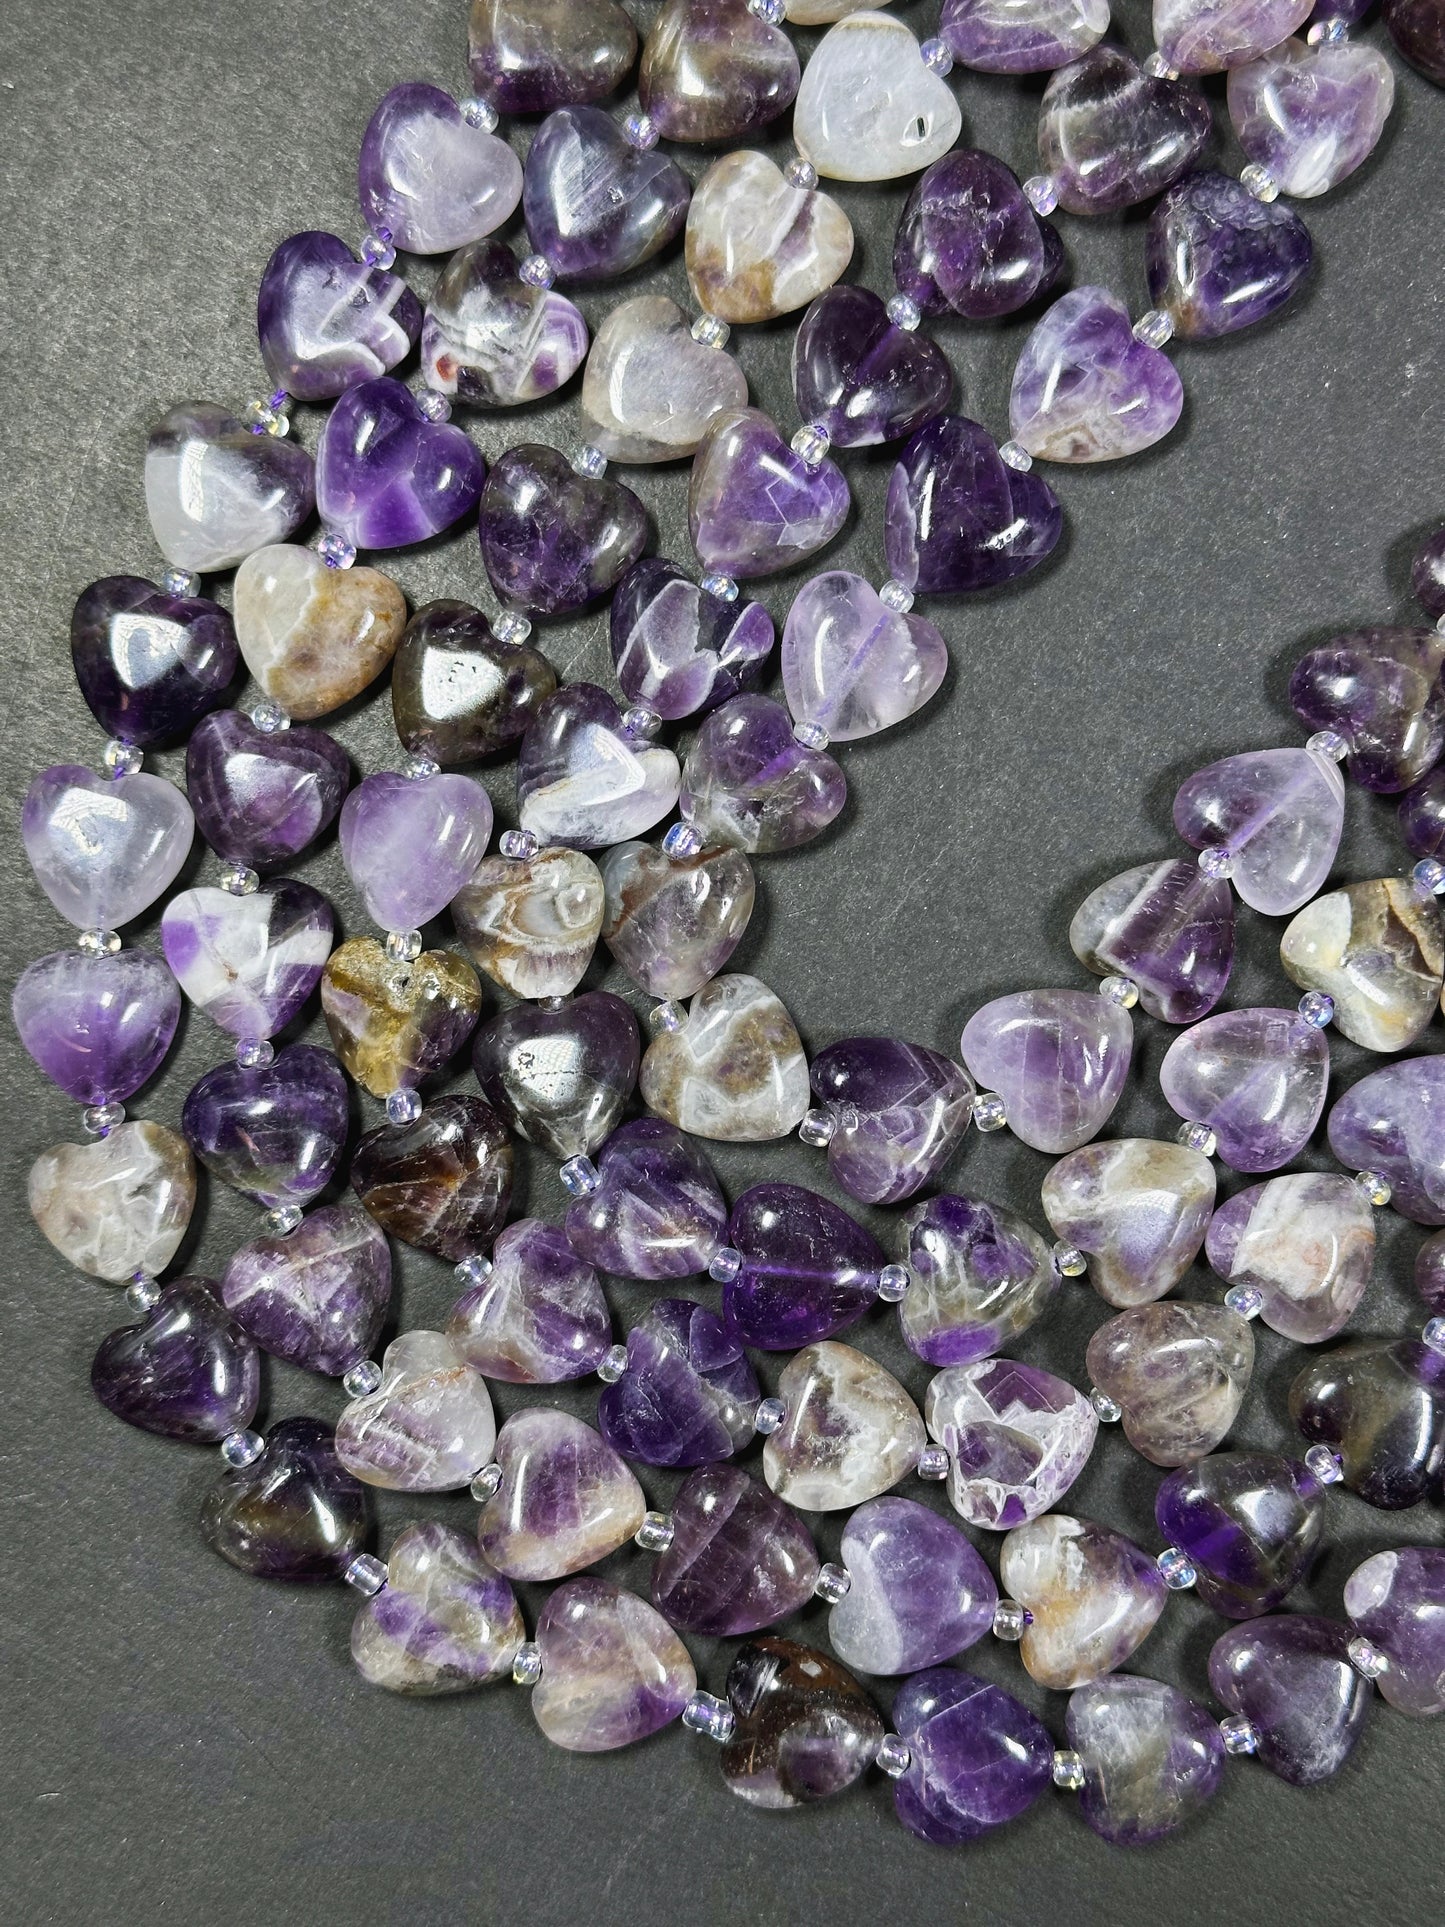 Natural Flower Amethyst Gemstone Bead 10mm 14mm Heart Shape, Beautiful Natural Purple White Color Amethyst, Great Quality Full Strand 15.5"